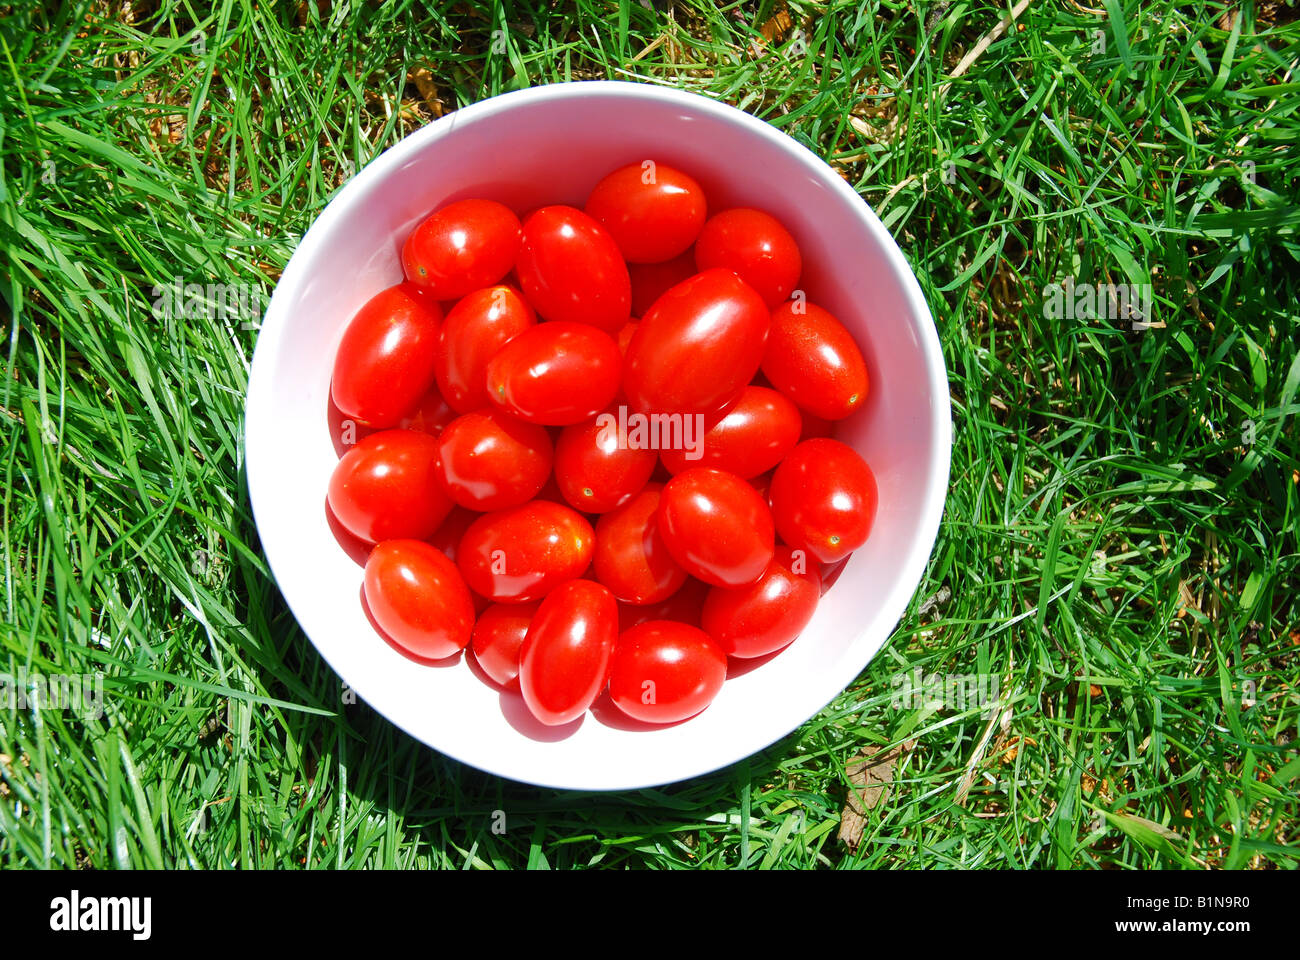 fresh tomatoes 'coeur de pigeon' in a white bowl with a grass background Stock Photo